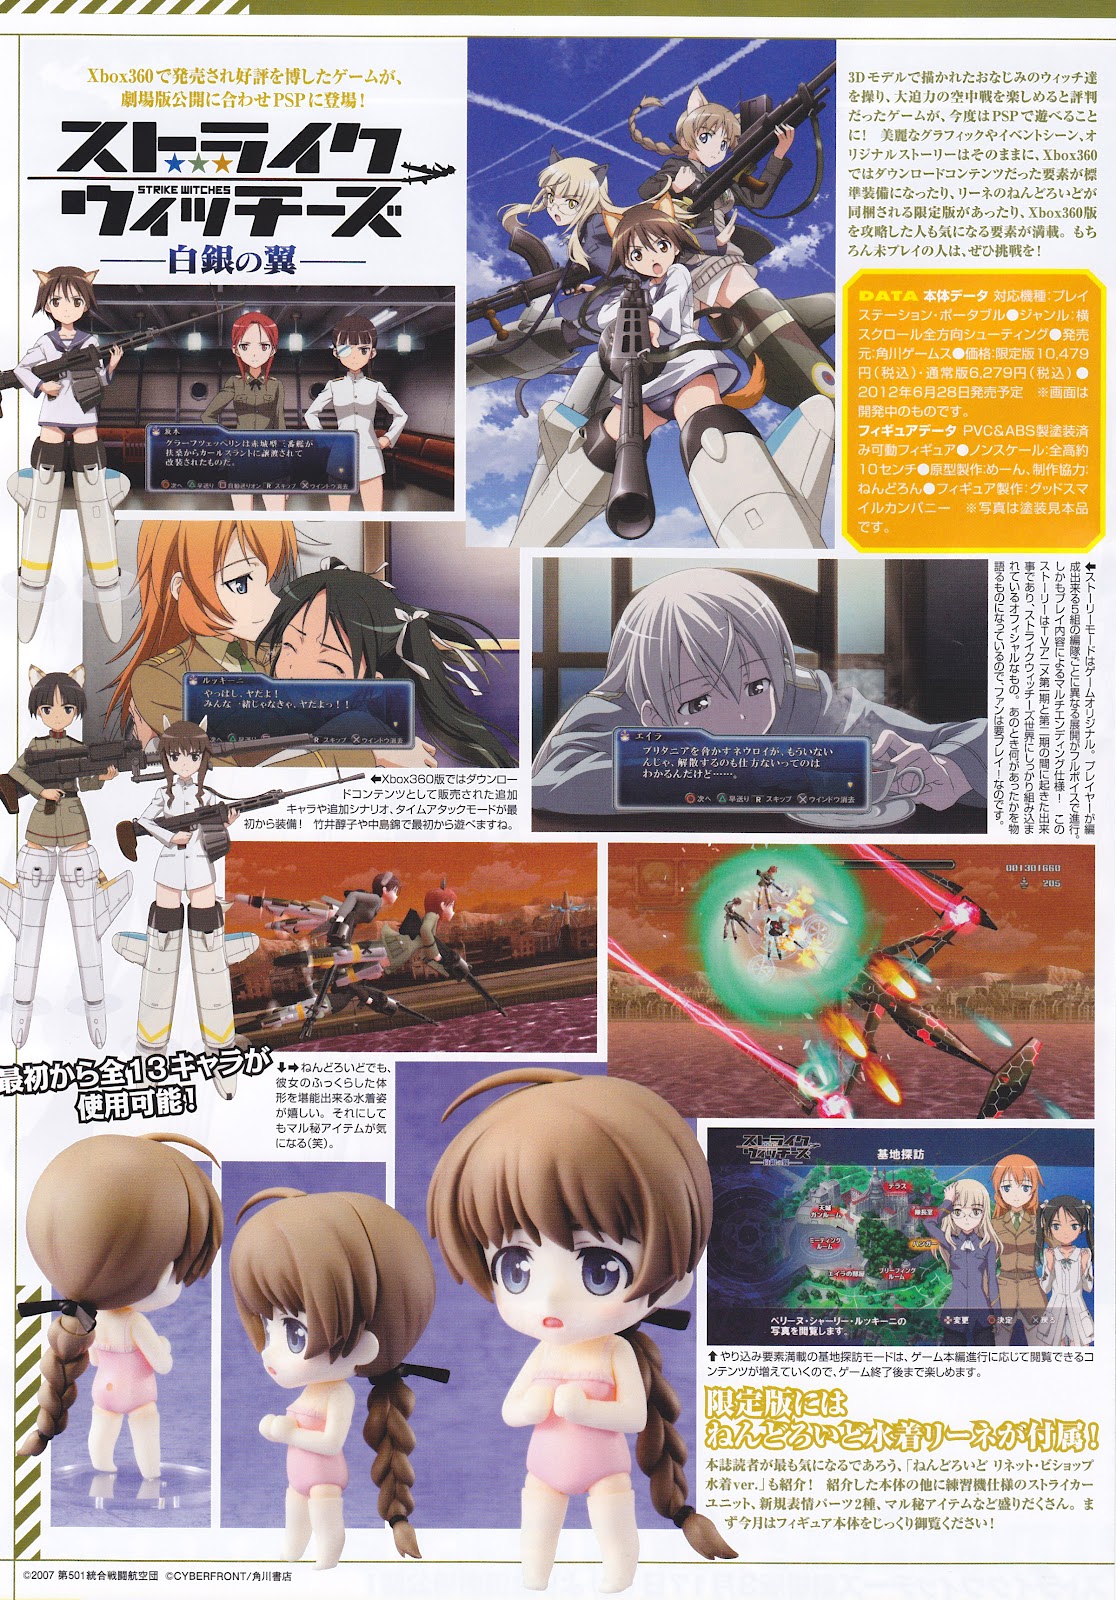 Gg Figure News Strike Witches Poster Image Dengeki Hobby Apr Issue